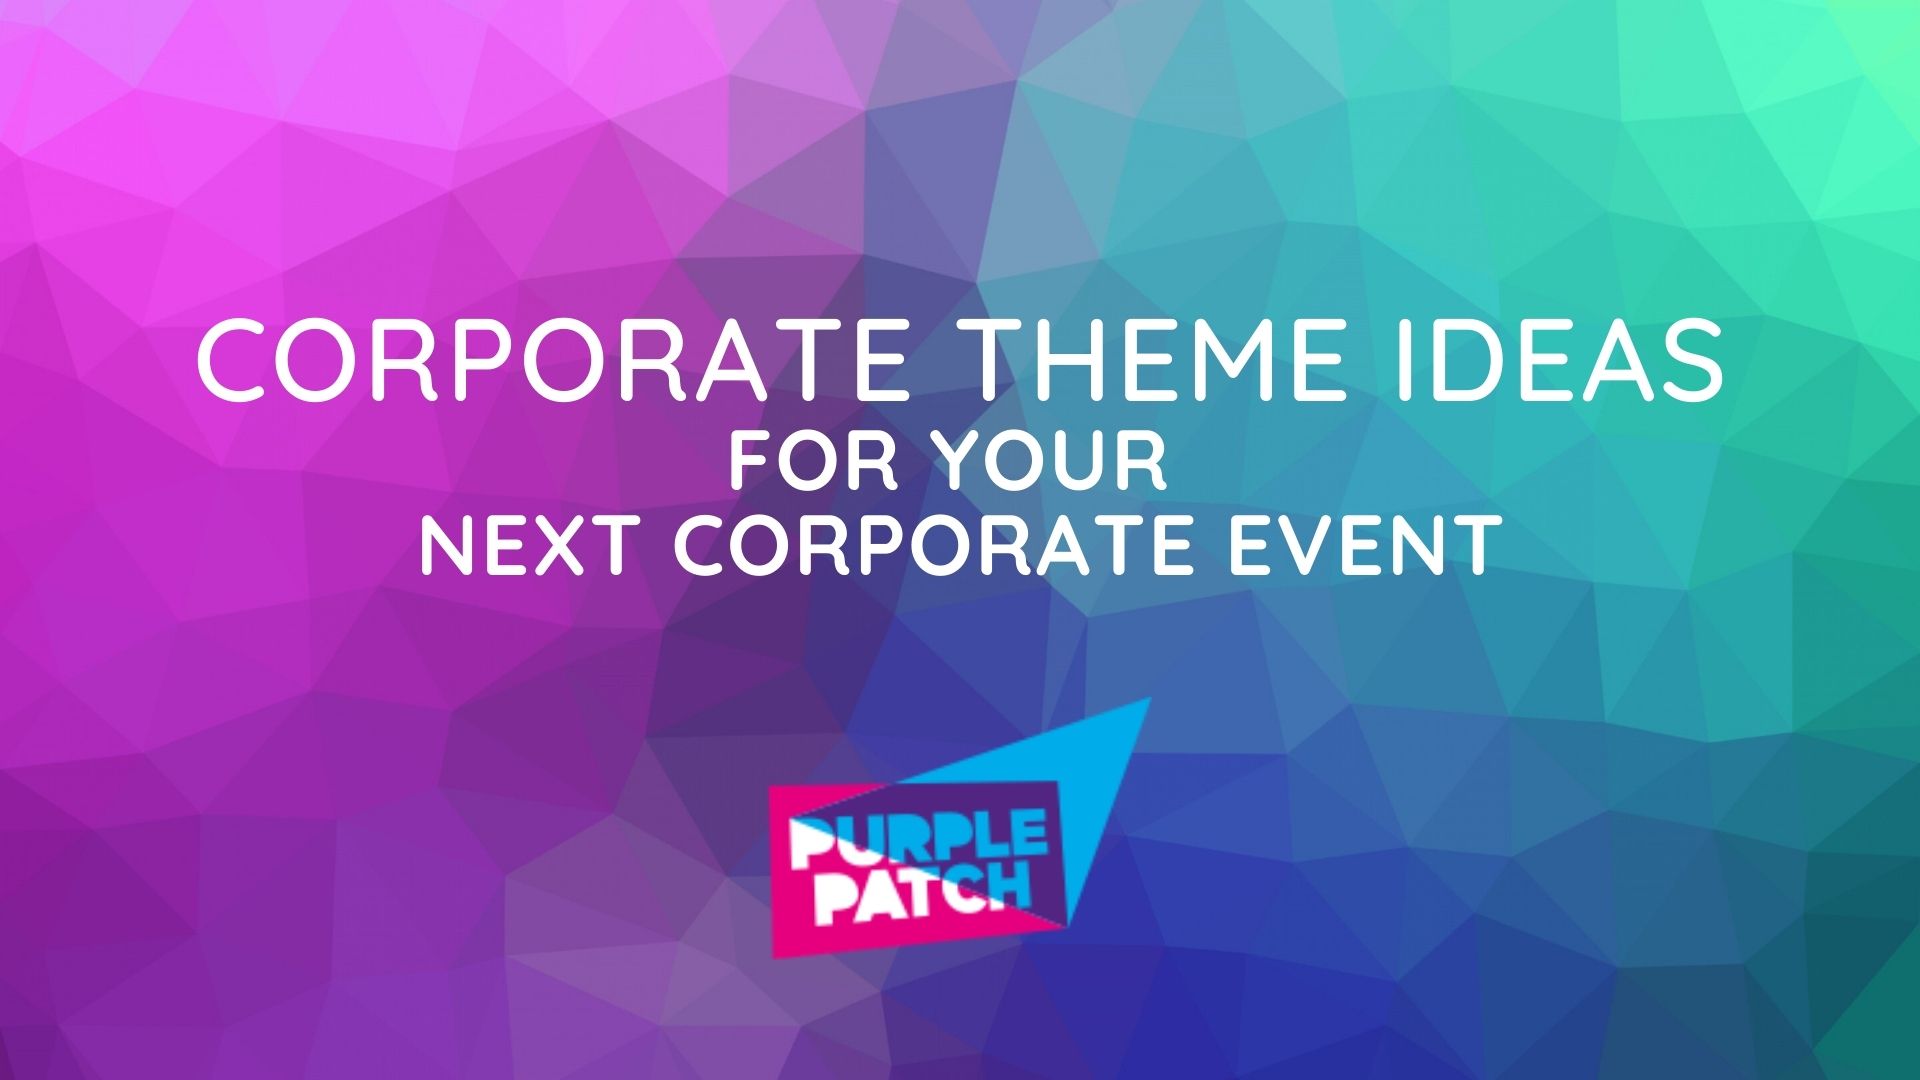 7 Exciting Corporate Theme Ideas for Your Next Corporate Event